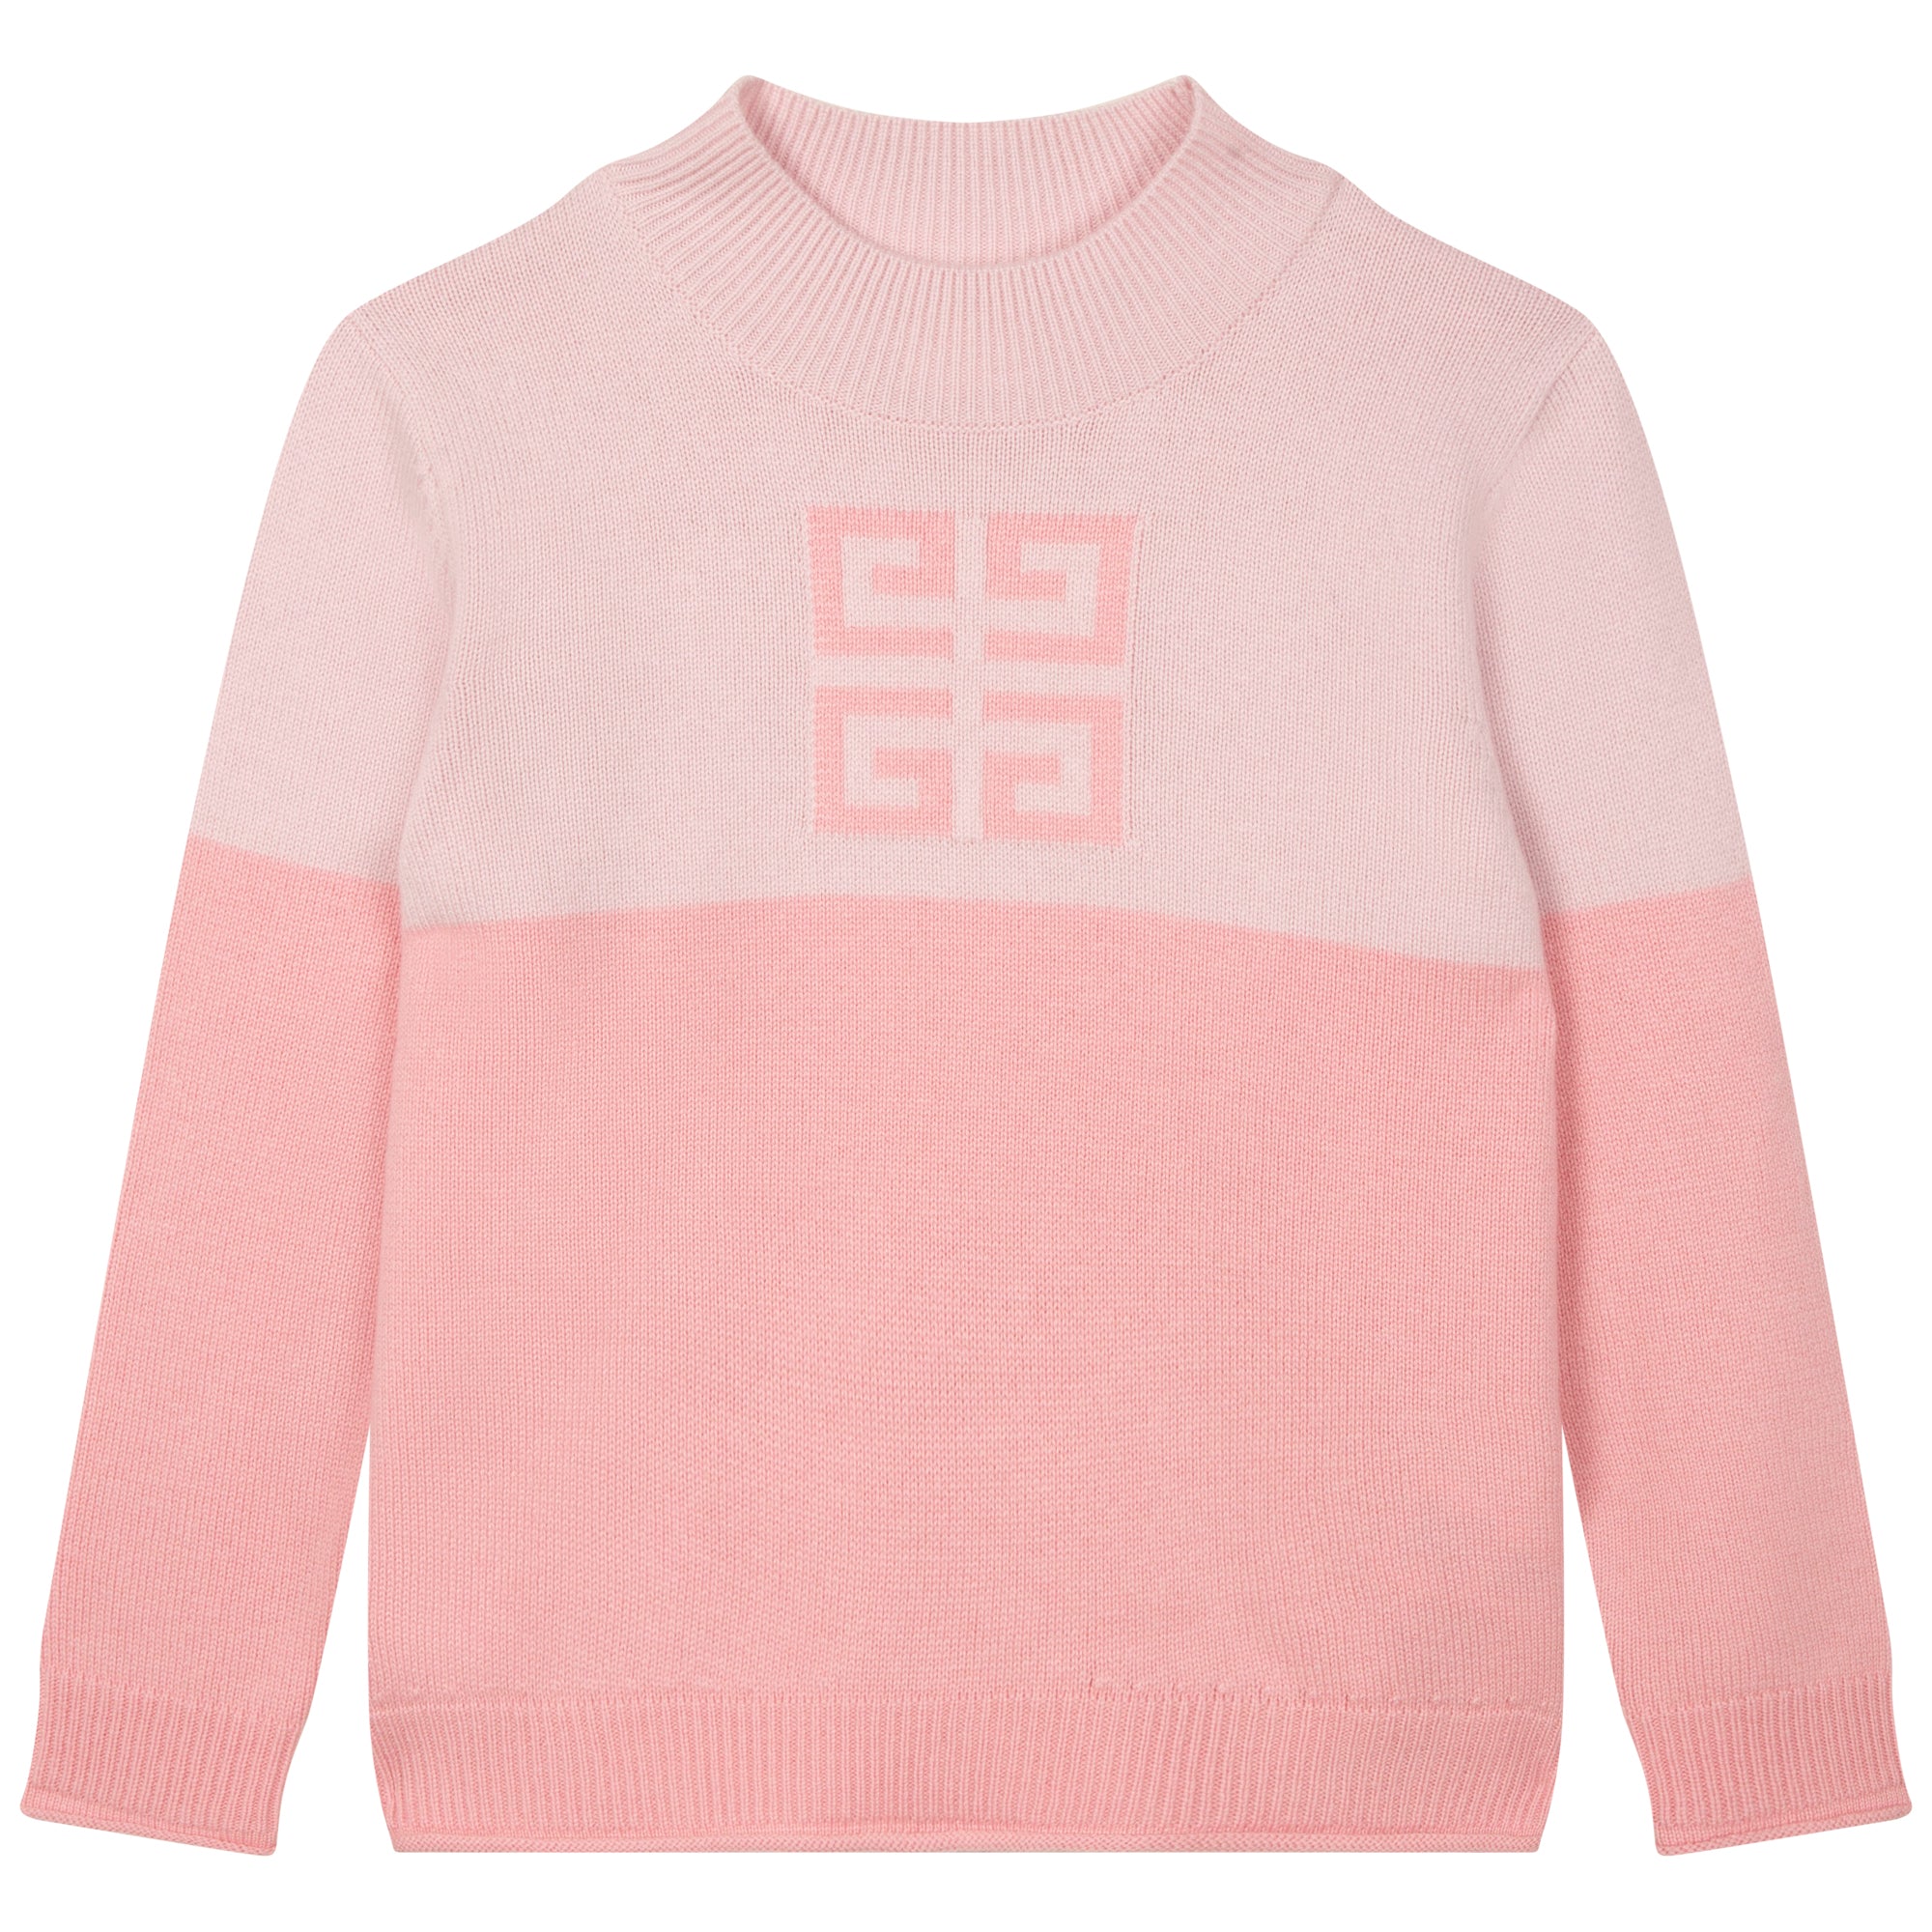 Givenchy Pink Sweater